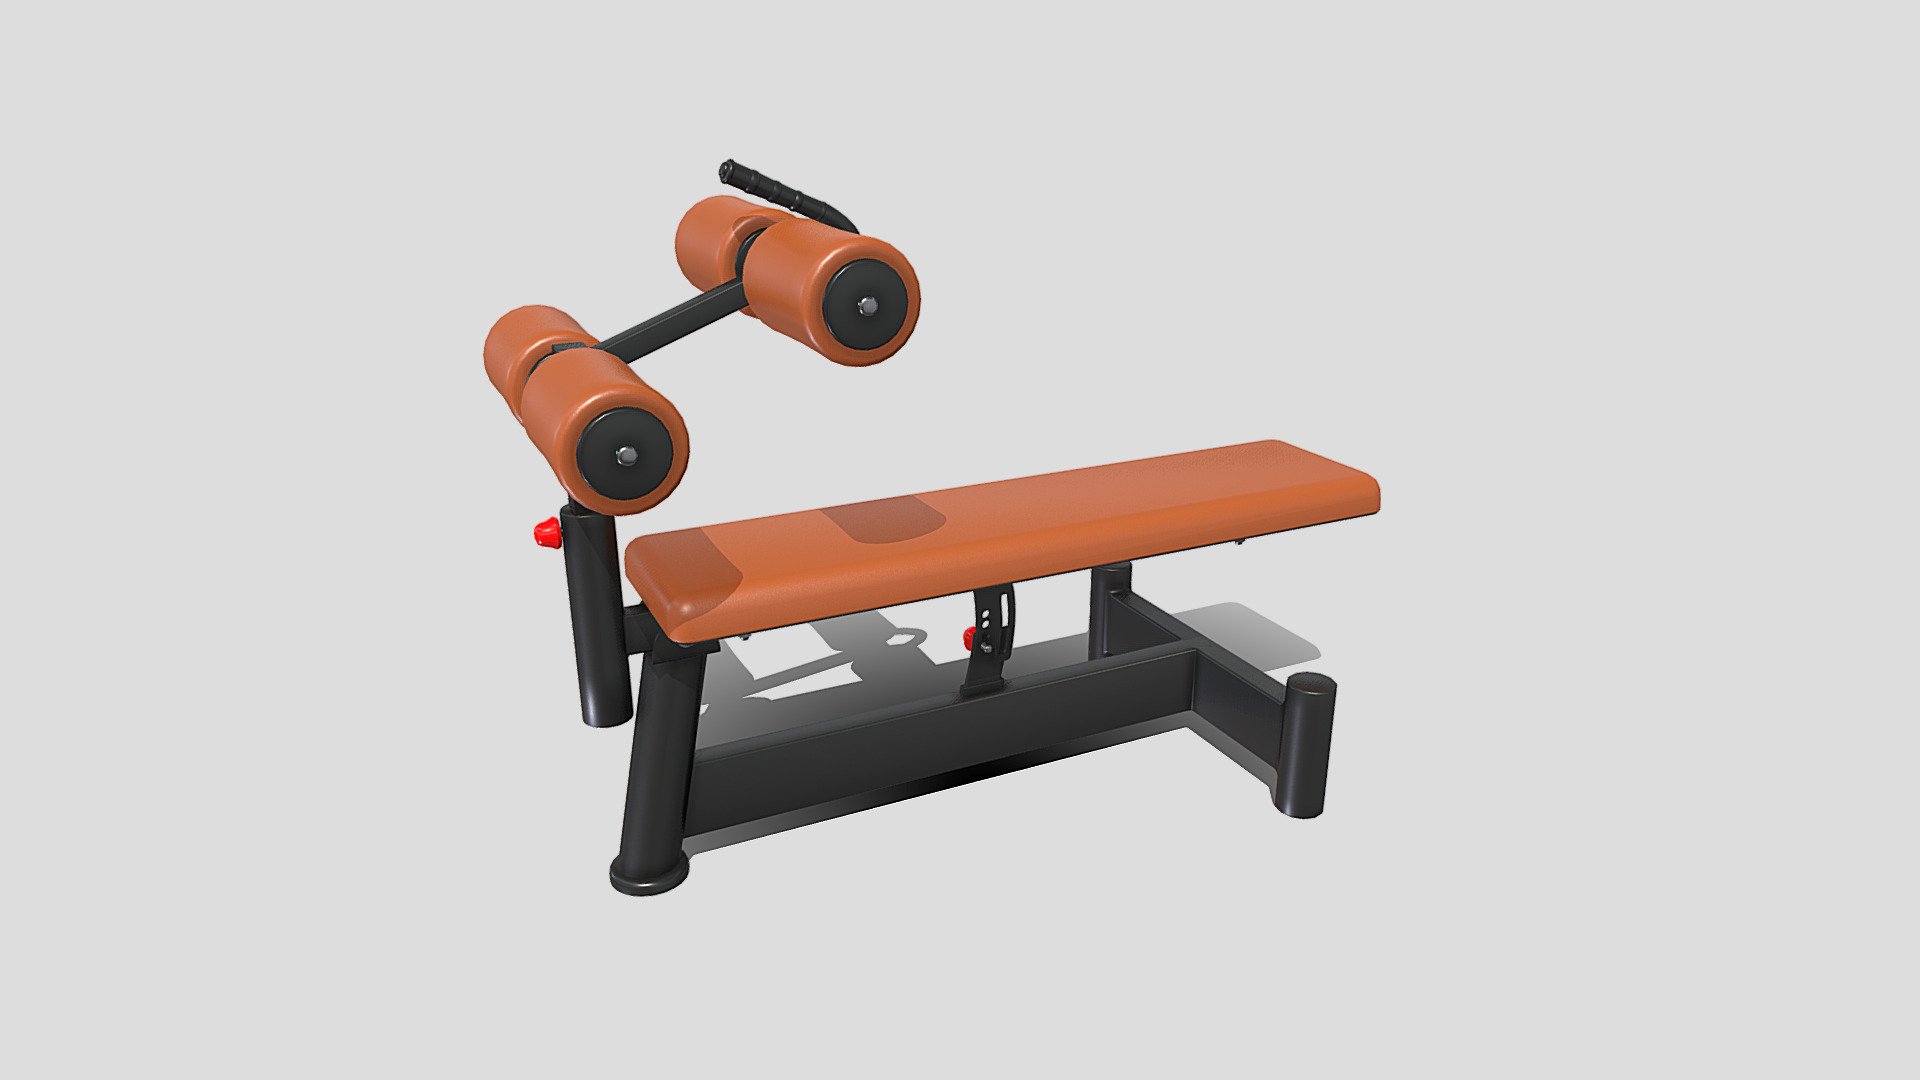 Gym machine 3d model built to real size, rendered with Cycles in Blender, as per seen on attached images. 

File formats:
-.blend, rendered with cycles, as seen in the images;
-.obj, with materials applied;
-.dae, with materials applied;
-.fbx, with materials applied;
-.stl;

Files come named appropriately and split by file format.

3D Software:
The 3D model was originally created in Blender 3.1 and rendered with Cycles.

Materials and textures:
The models have materials applied in all formats, and are ready to import and render.
Materials are image based using PBR, the model comes with five 4k png image textures.

Preview scenes:
The preview images are rendered in Blender using its built-in render engine &lsquo;Cycles'.
Note that the blend files come directly with the rendering scene included and the render command will generate the exact result as seen in previews.

General:
The models are built mostly out of quads.

For any problems please feel free to contact me.

Don't forget to rate and enjoy! - Adjustable Crunch Bench - Buy Royalty Free 3D model by dragosburian 3d model